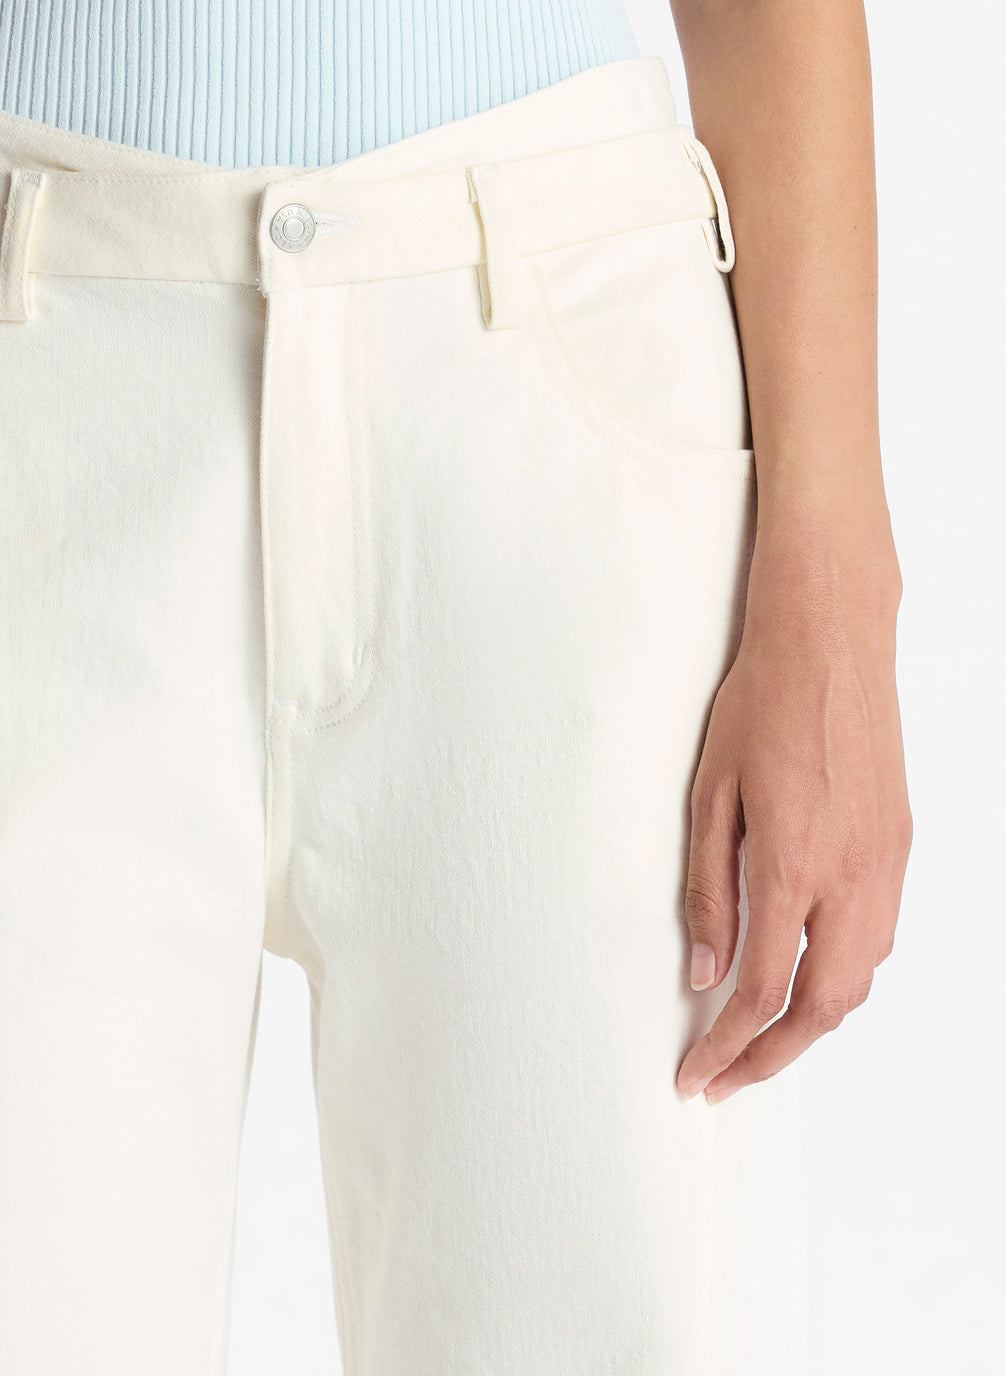 detail view of woman wearing light blue collared shirt and white wide leg jeans